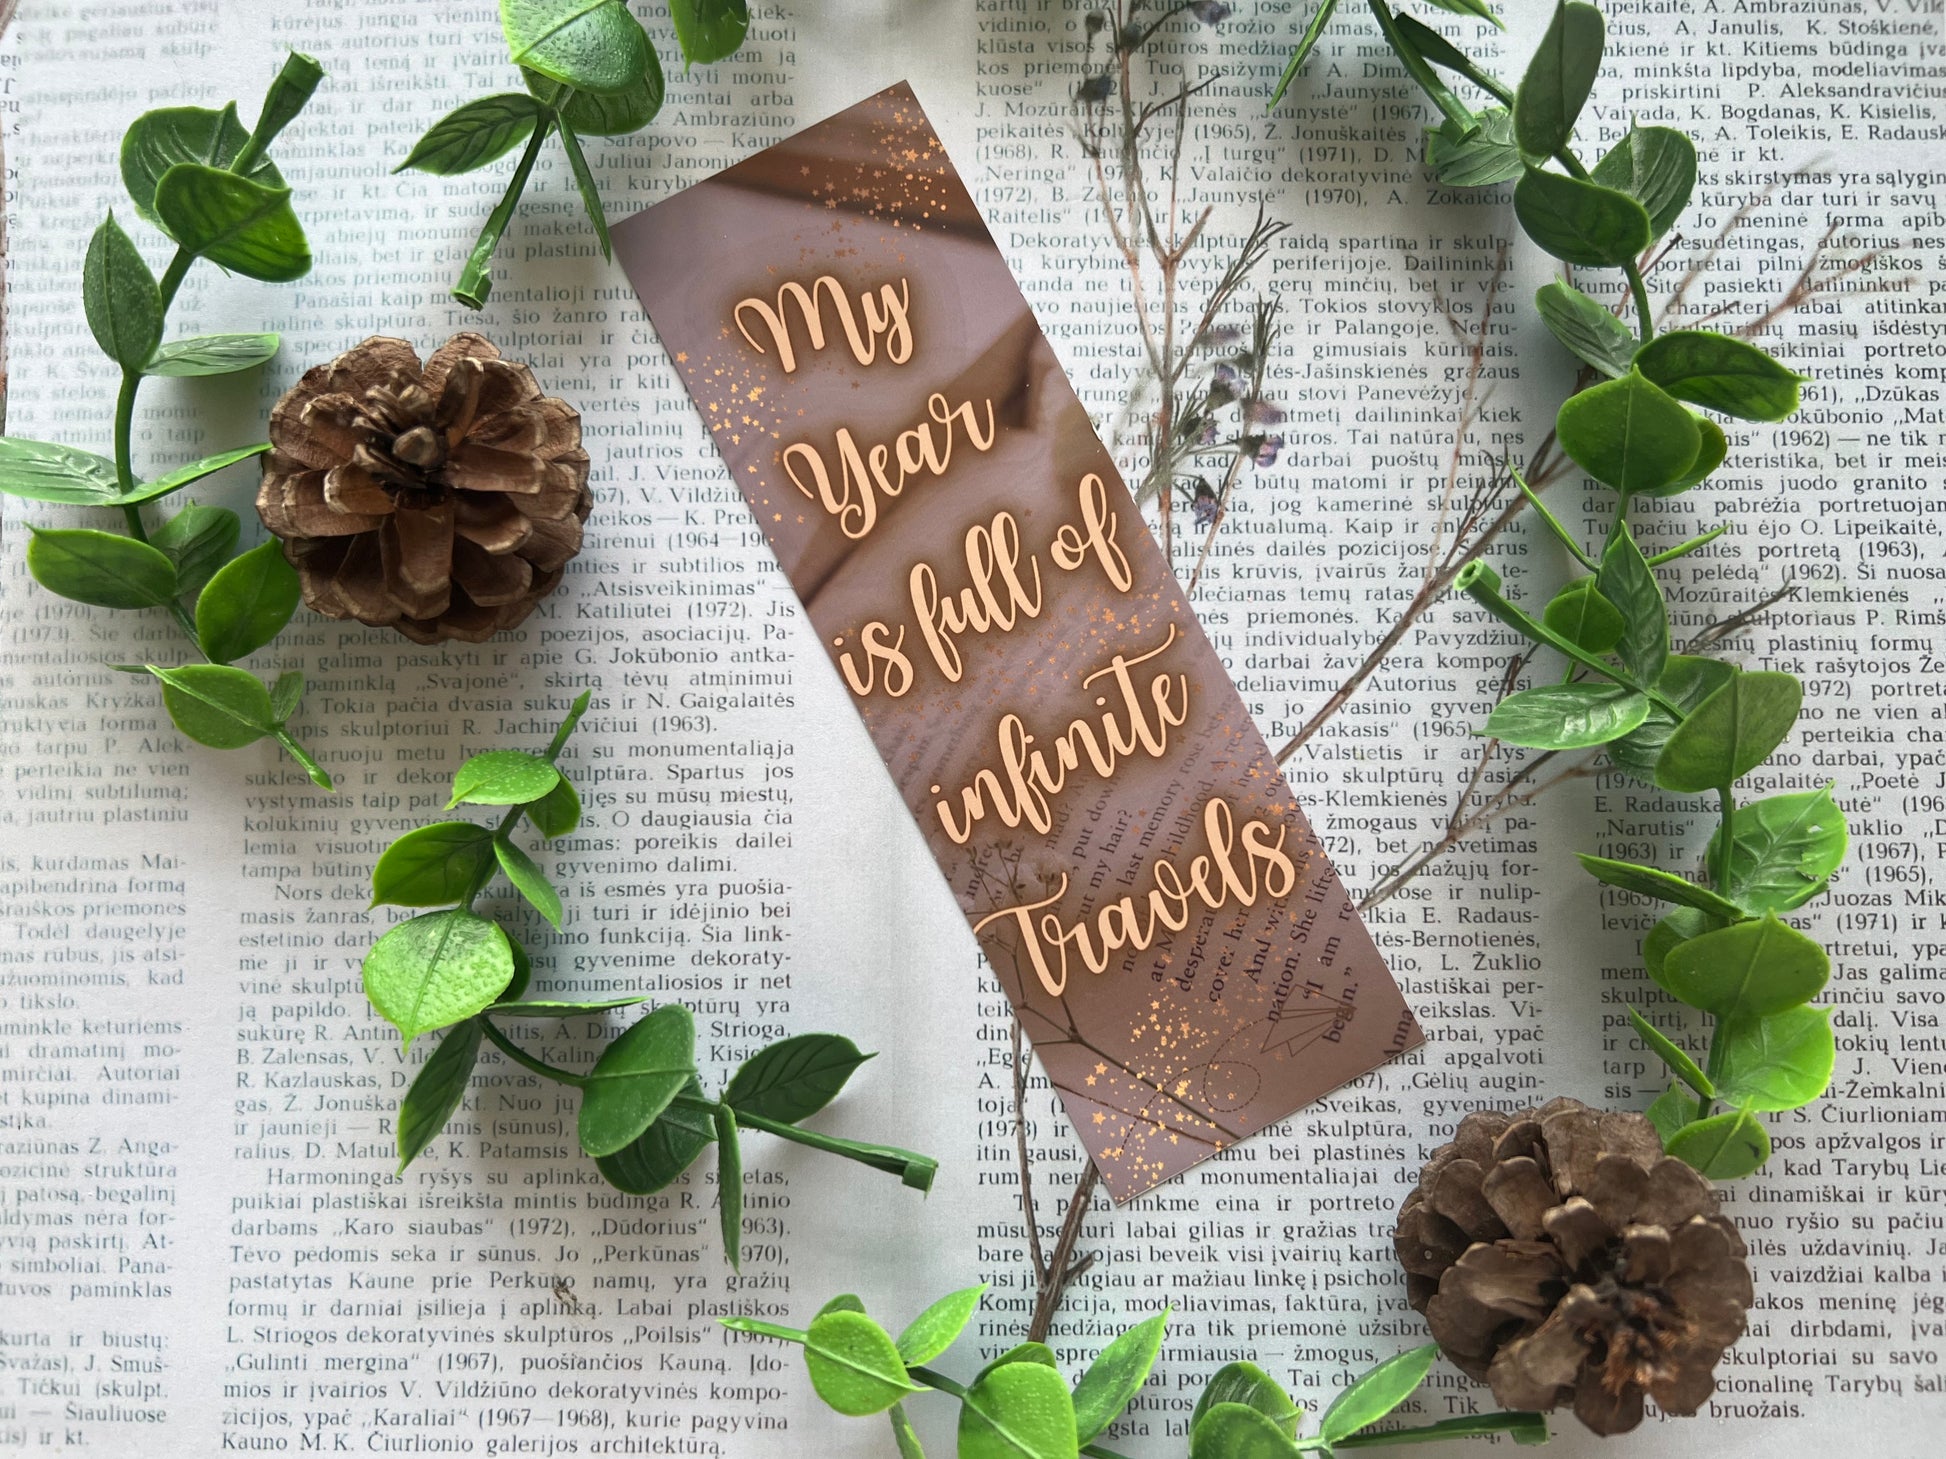 December Monthly Bookmark Club Theme: End of the Year – Likes and